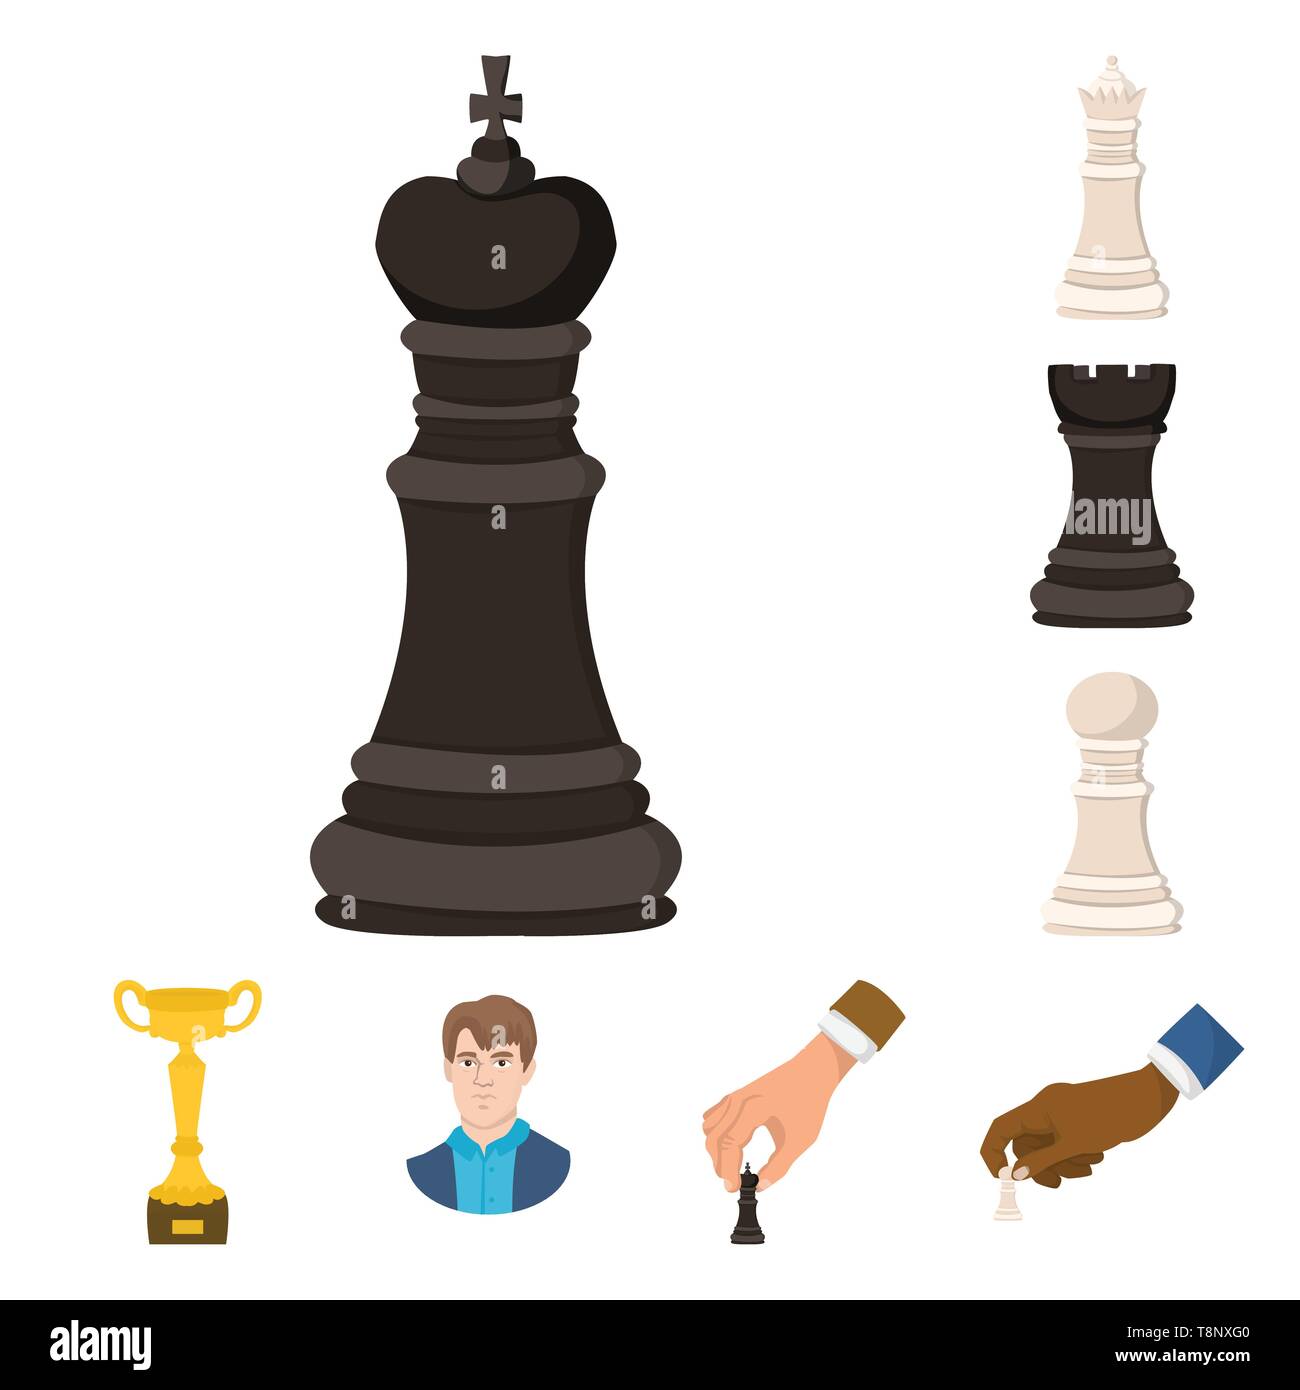 Queen King Checkmate: Chess Game, Cartoon Stock Vector